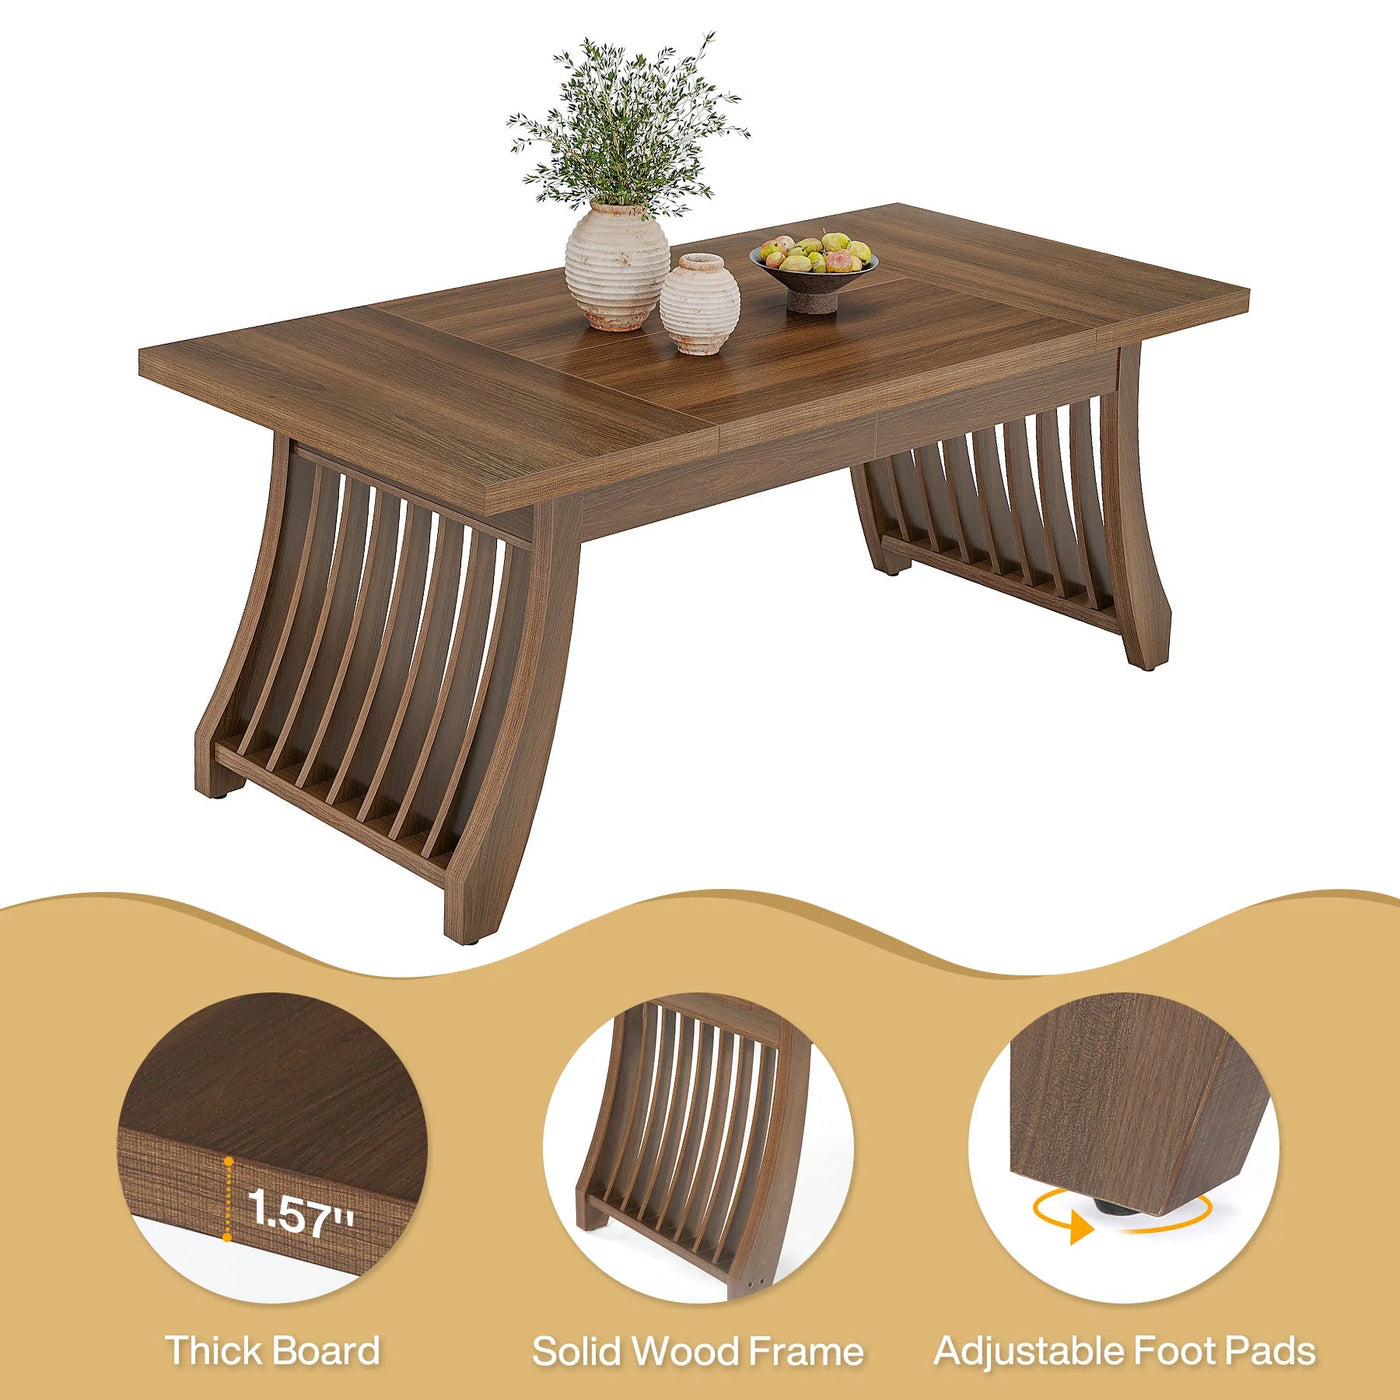 Carbella Rectangular Dining Table | Wood Kitchen Table for 6-8 People